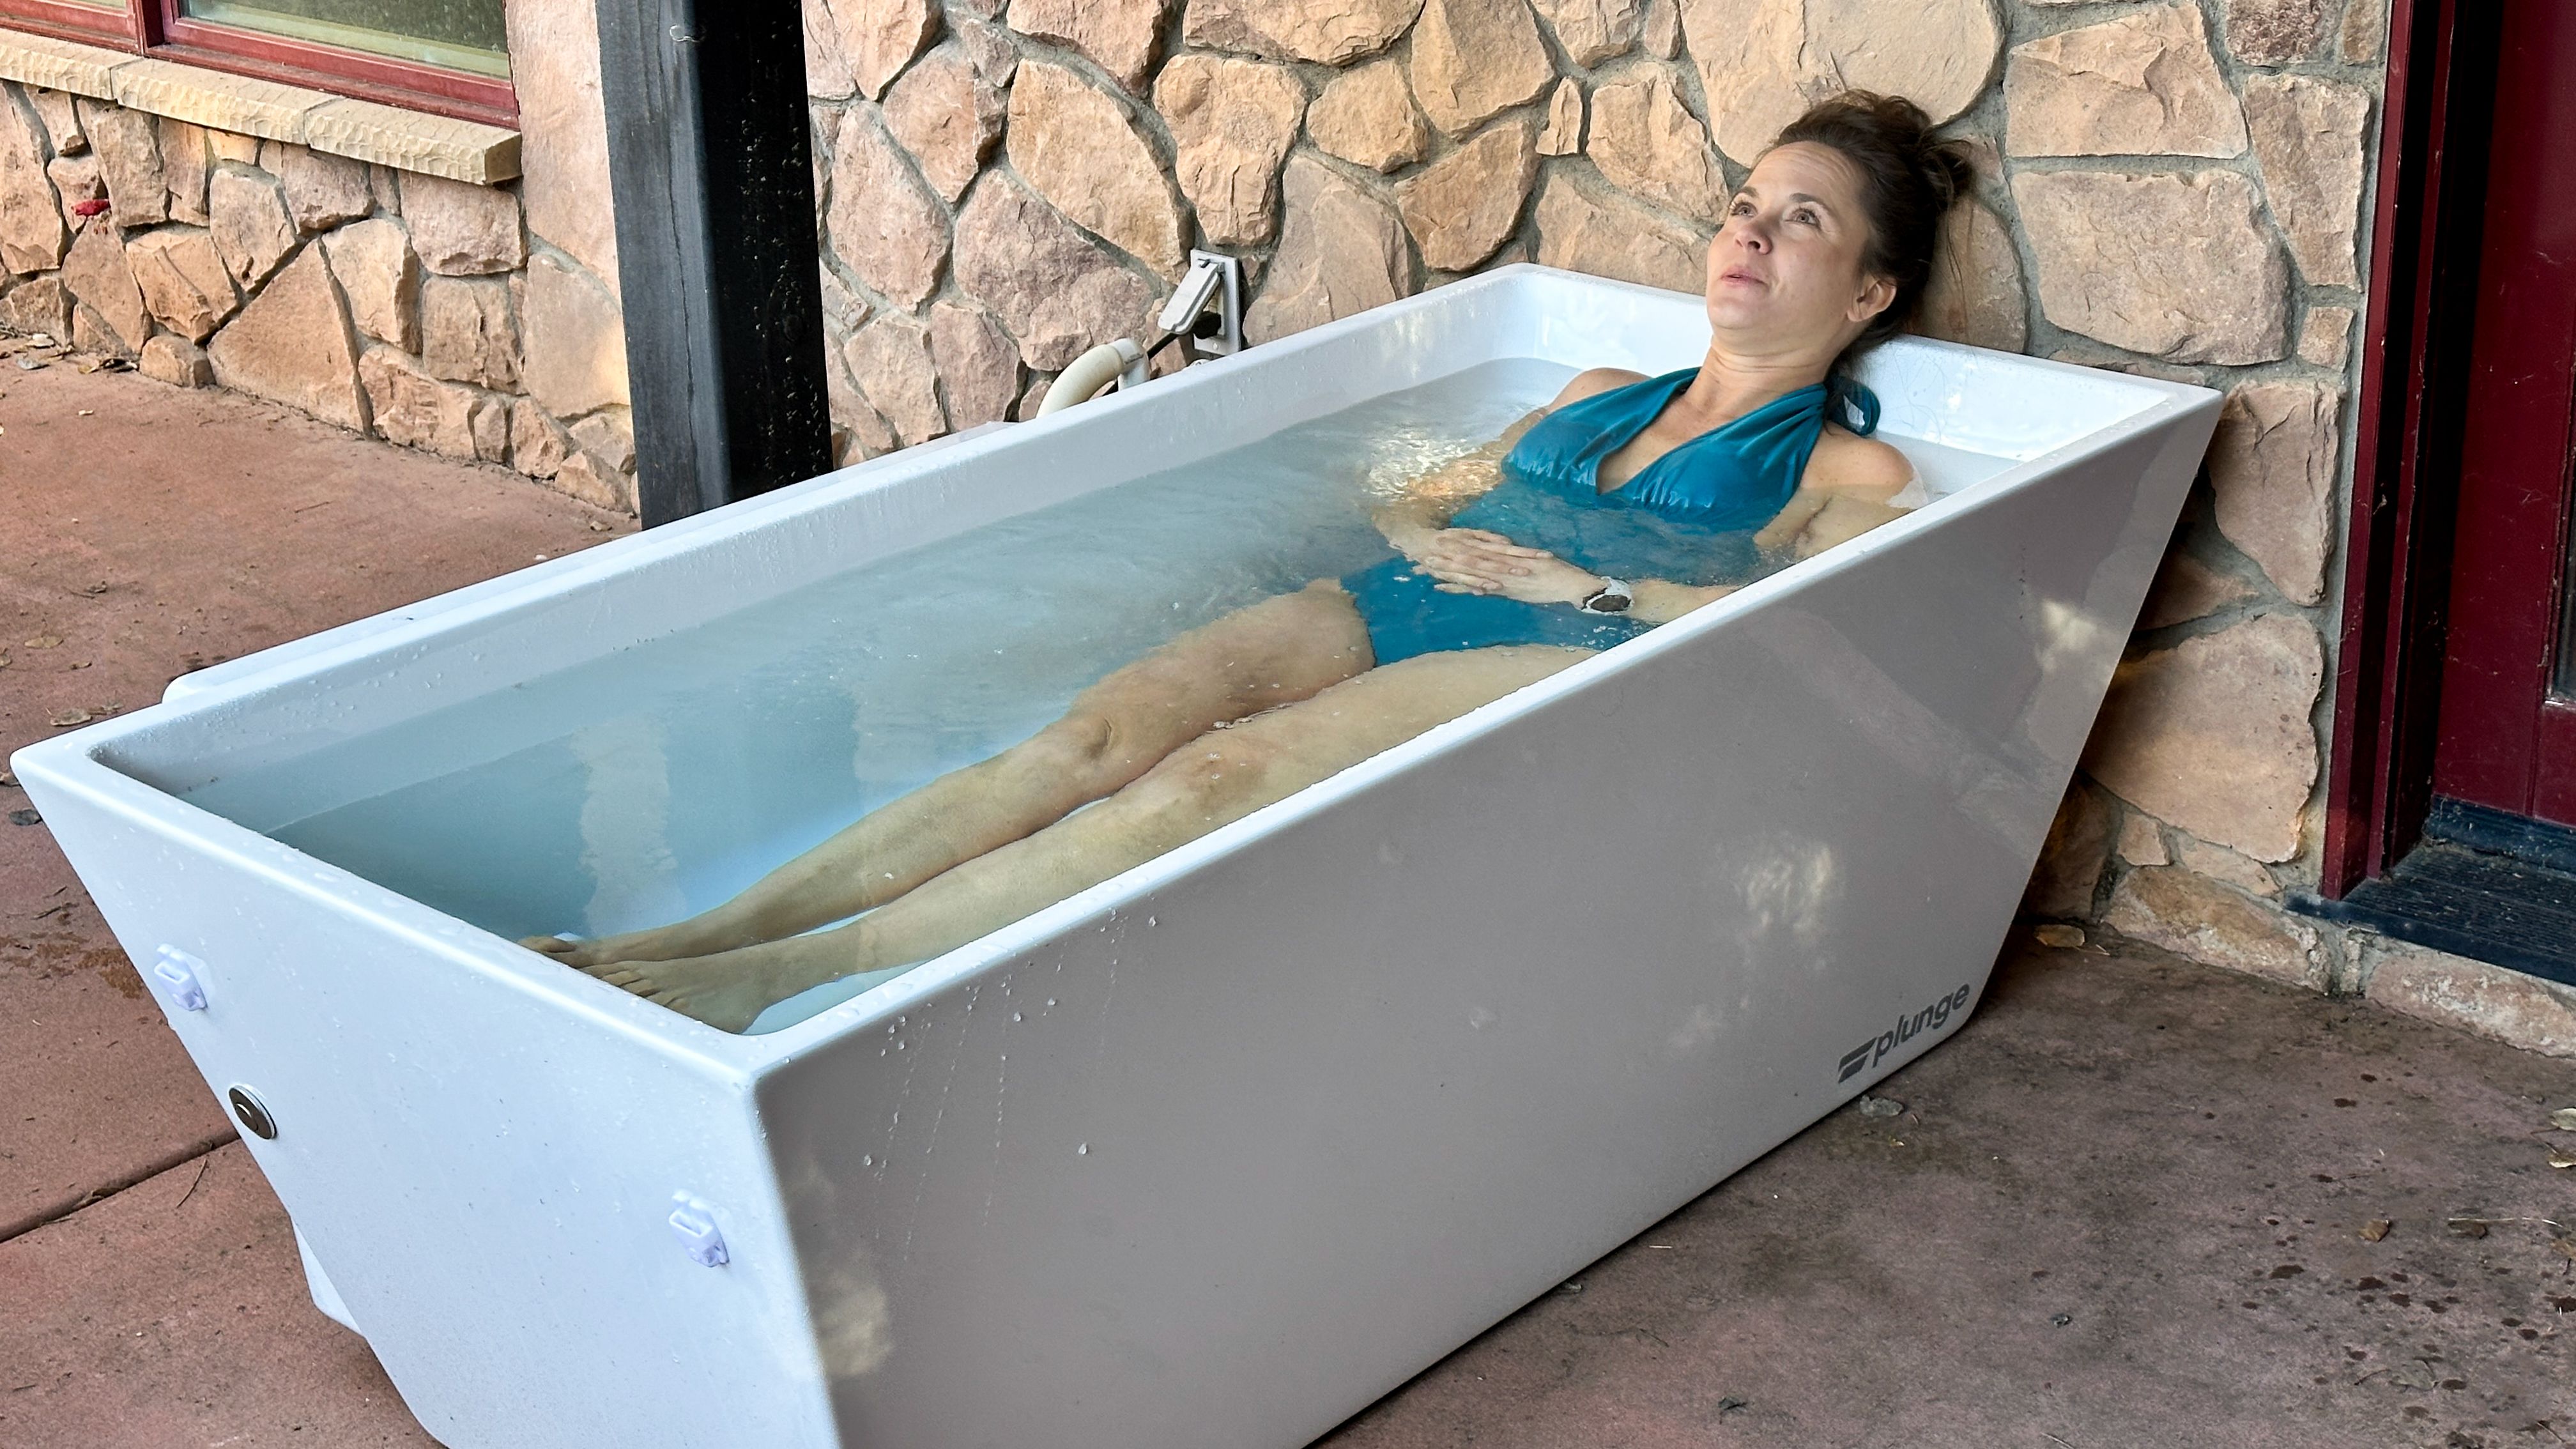 These are the best cold plunges for recovery 